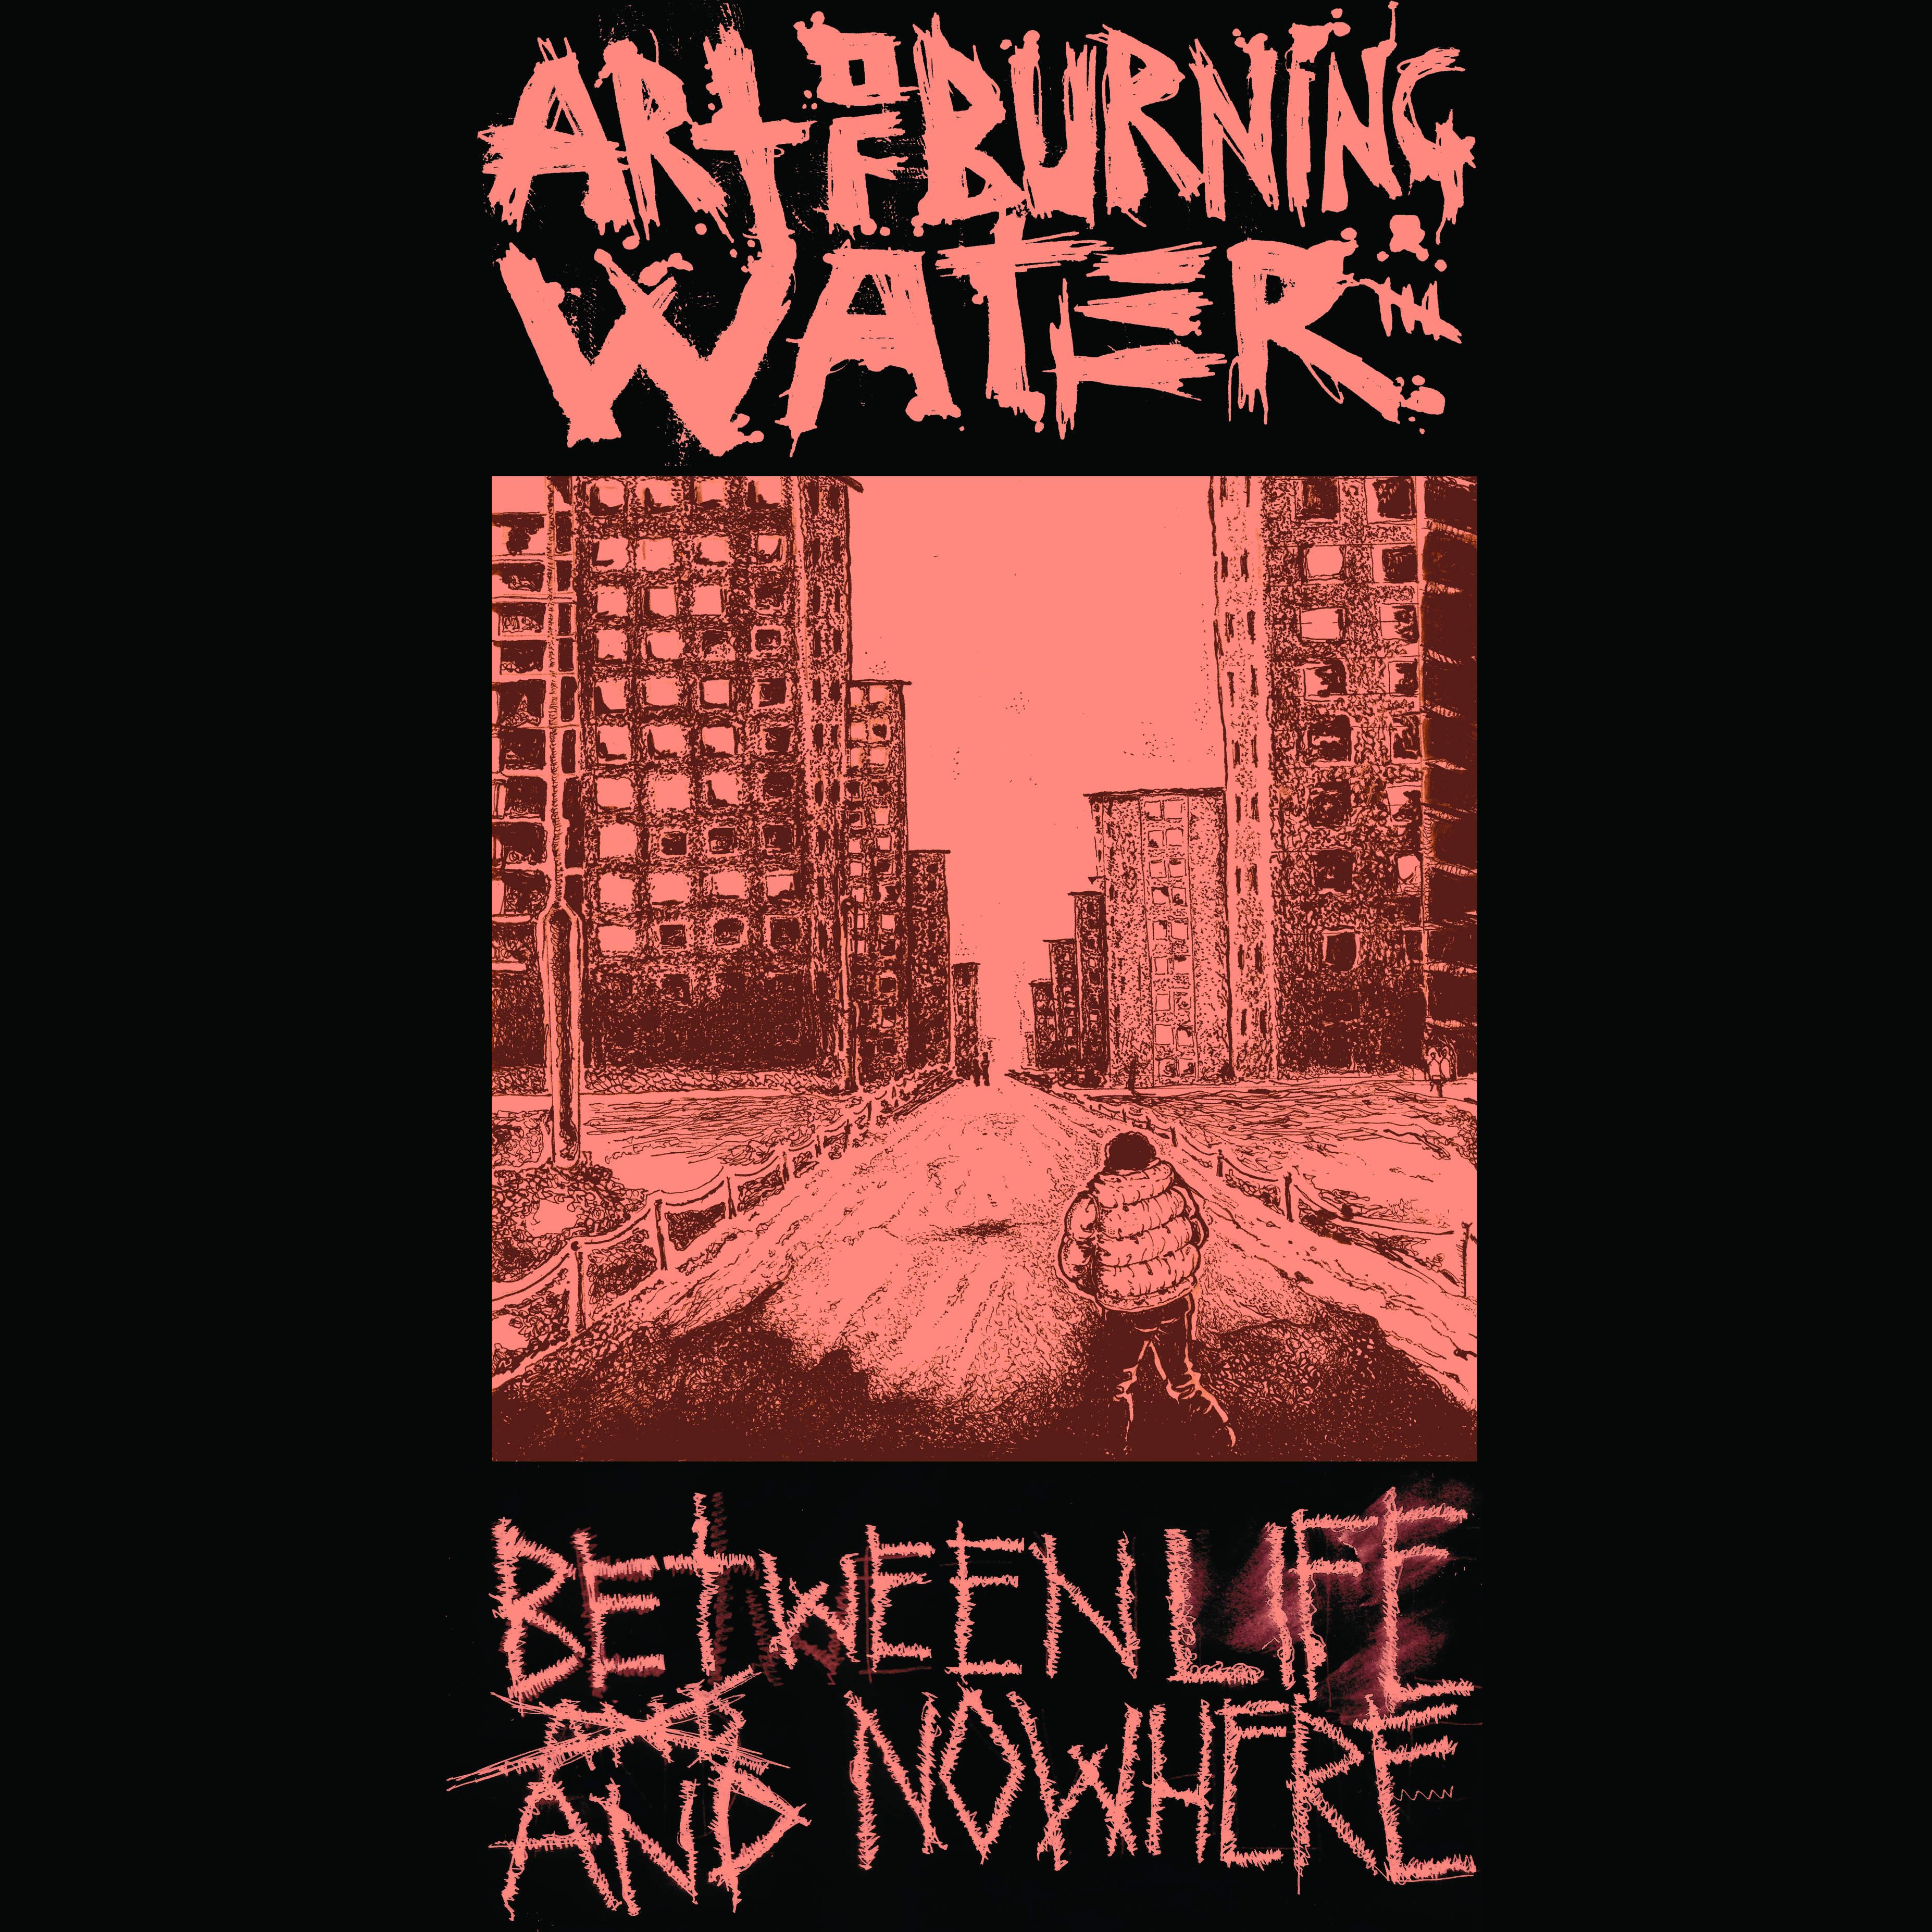 ART OF BURNING WATER Between Life And Nowhere LP